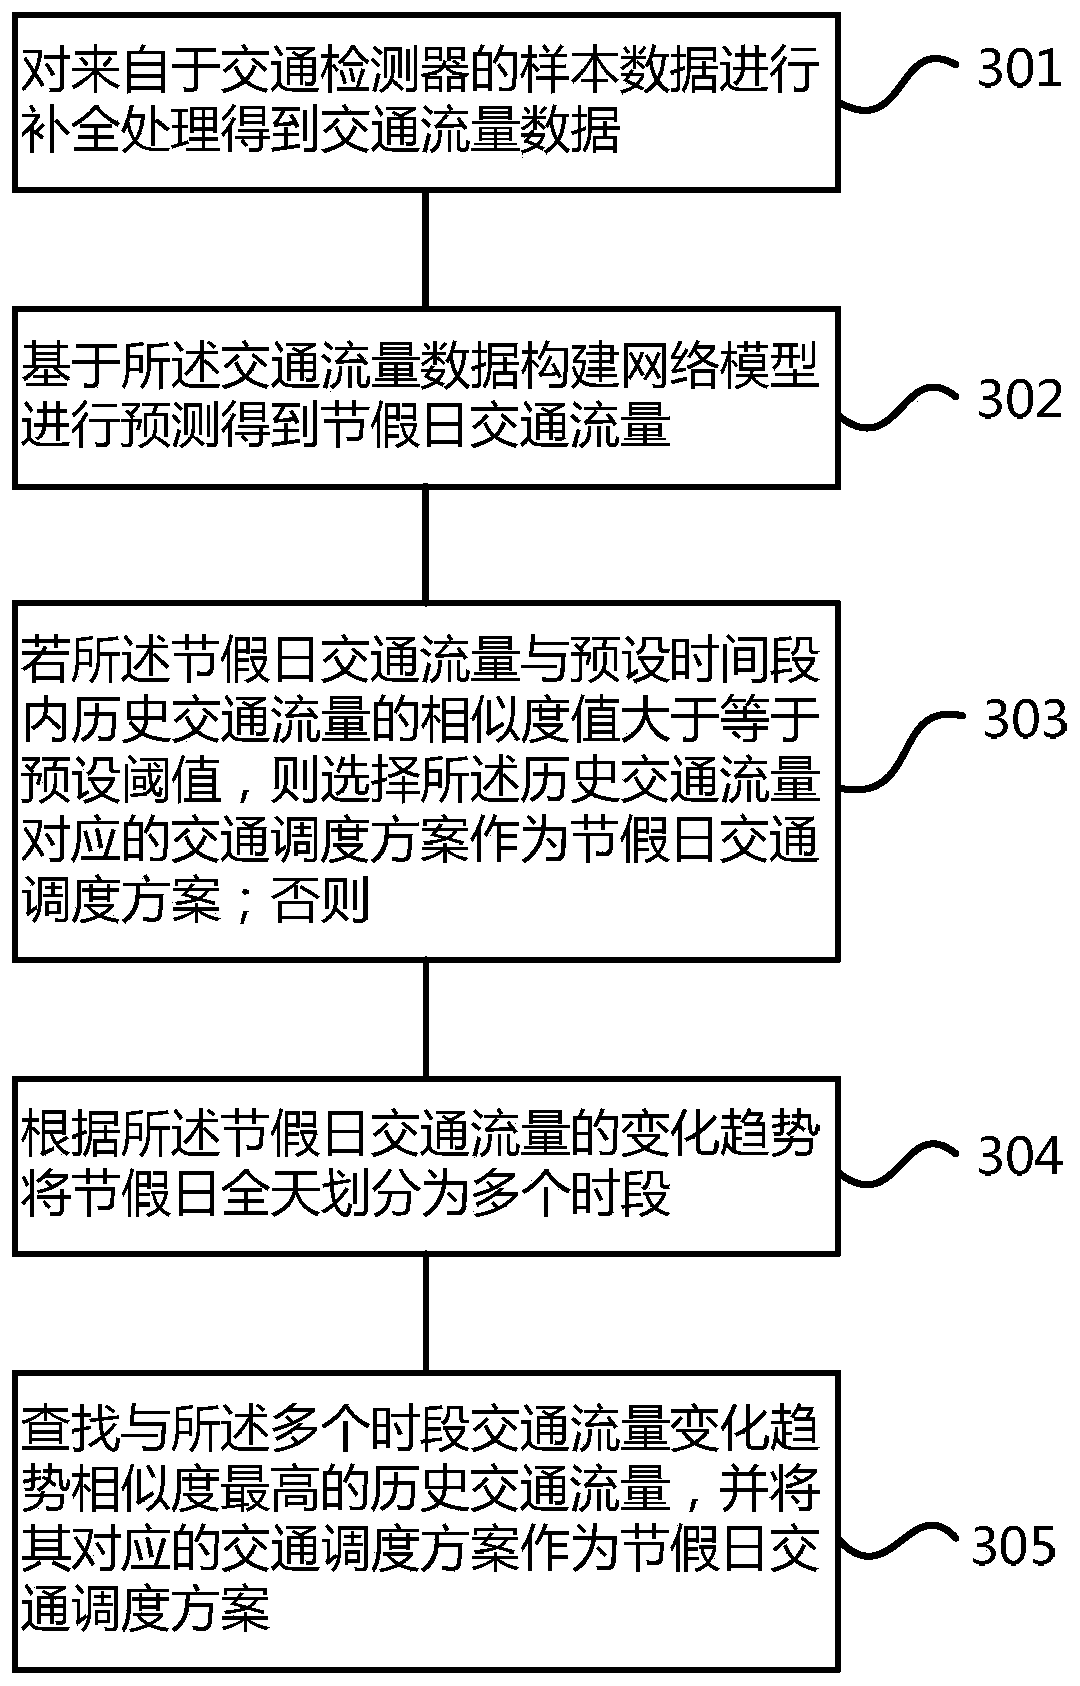 Festival and holiday traffic scheduling method and device based on traffic flow prediction